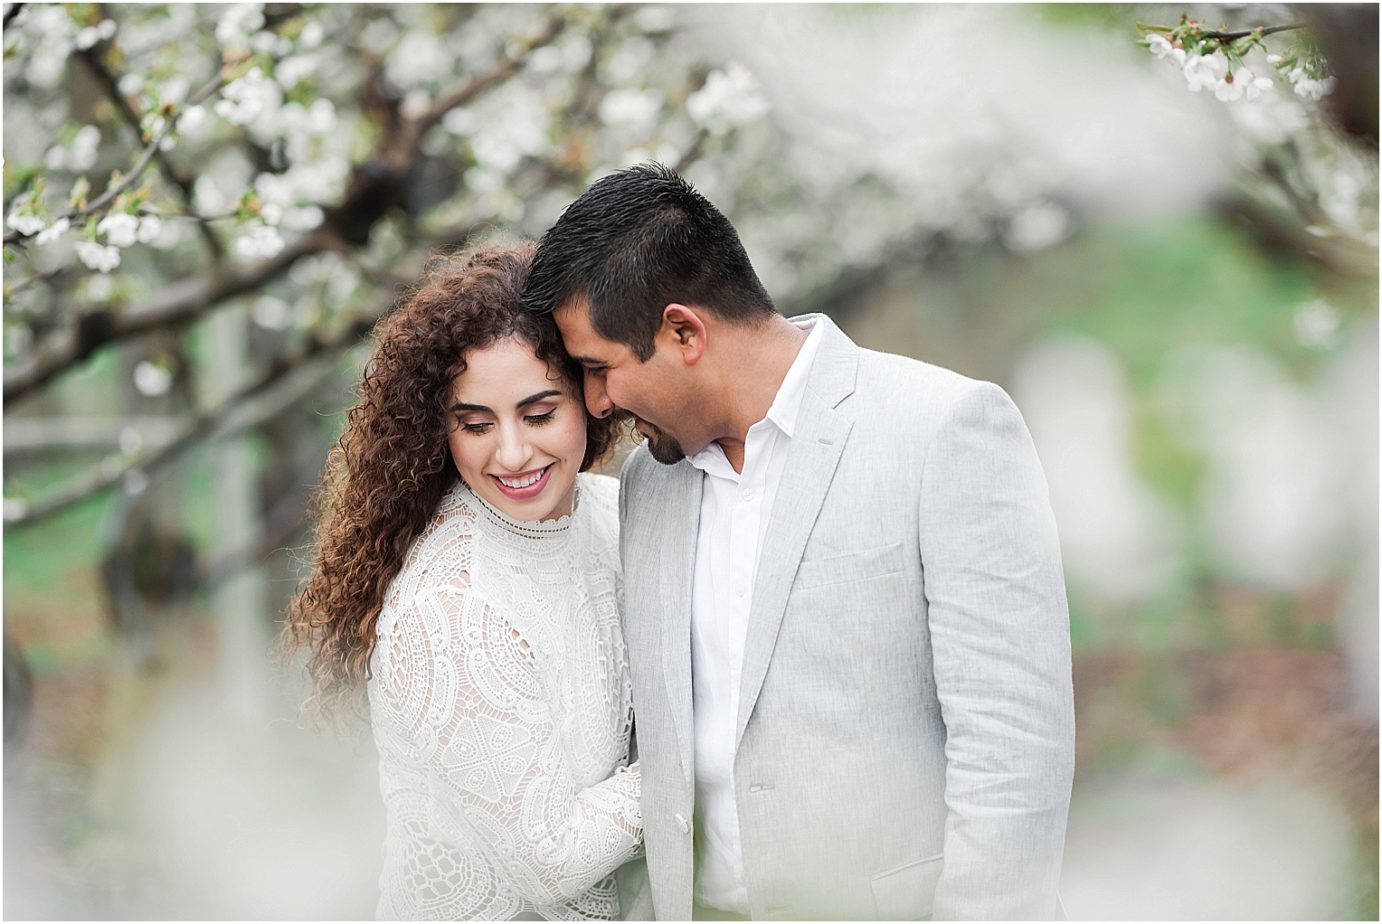 Favorite engagement photos of 2018 Misty C Photography Blog cherry blossom session